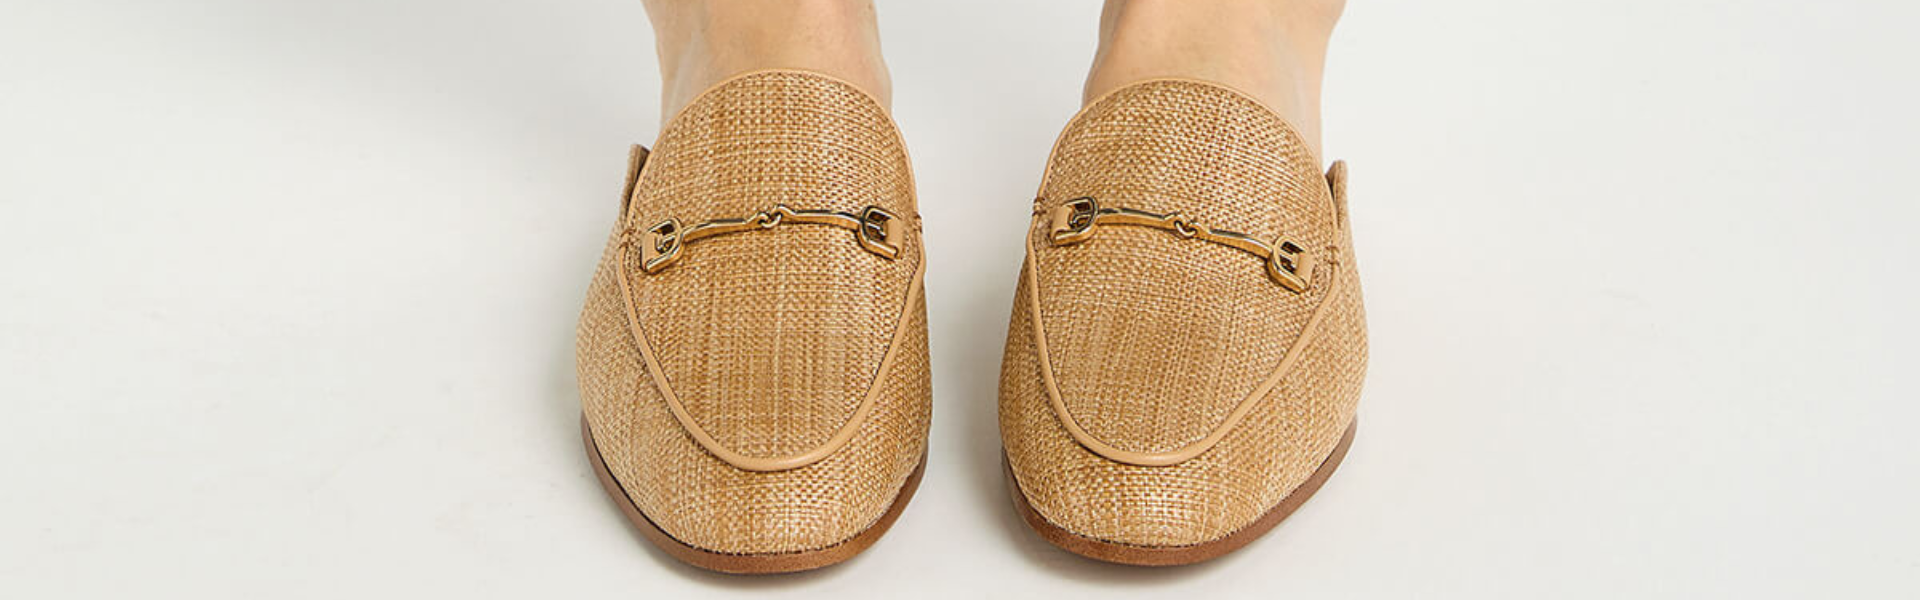 Loafers & Flats